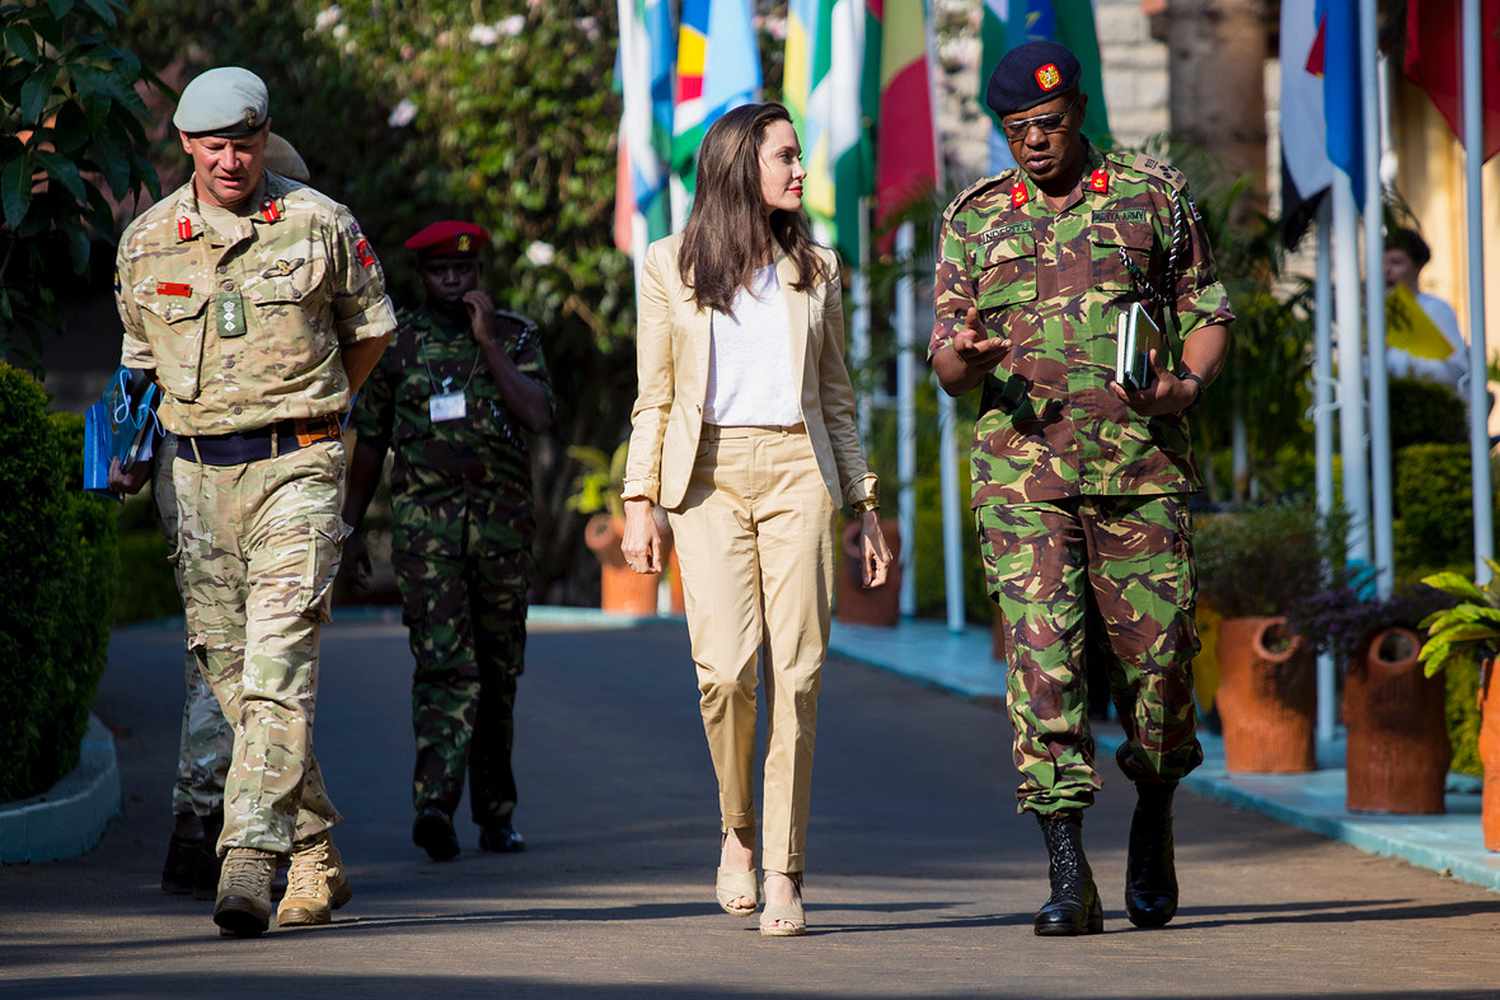 Angelina Jolie Visits British Peace Support Team In Kenya, Africa - Tuesday 20th June 2017